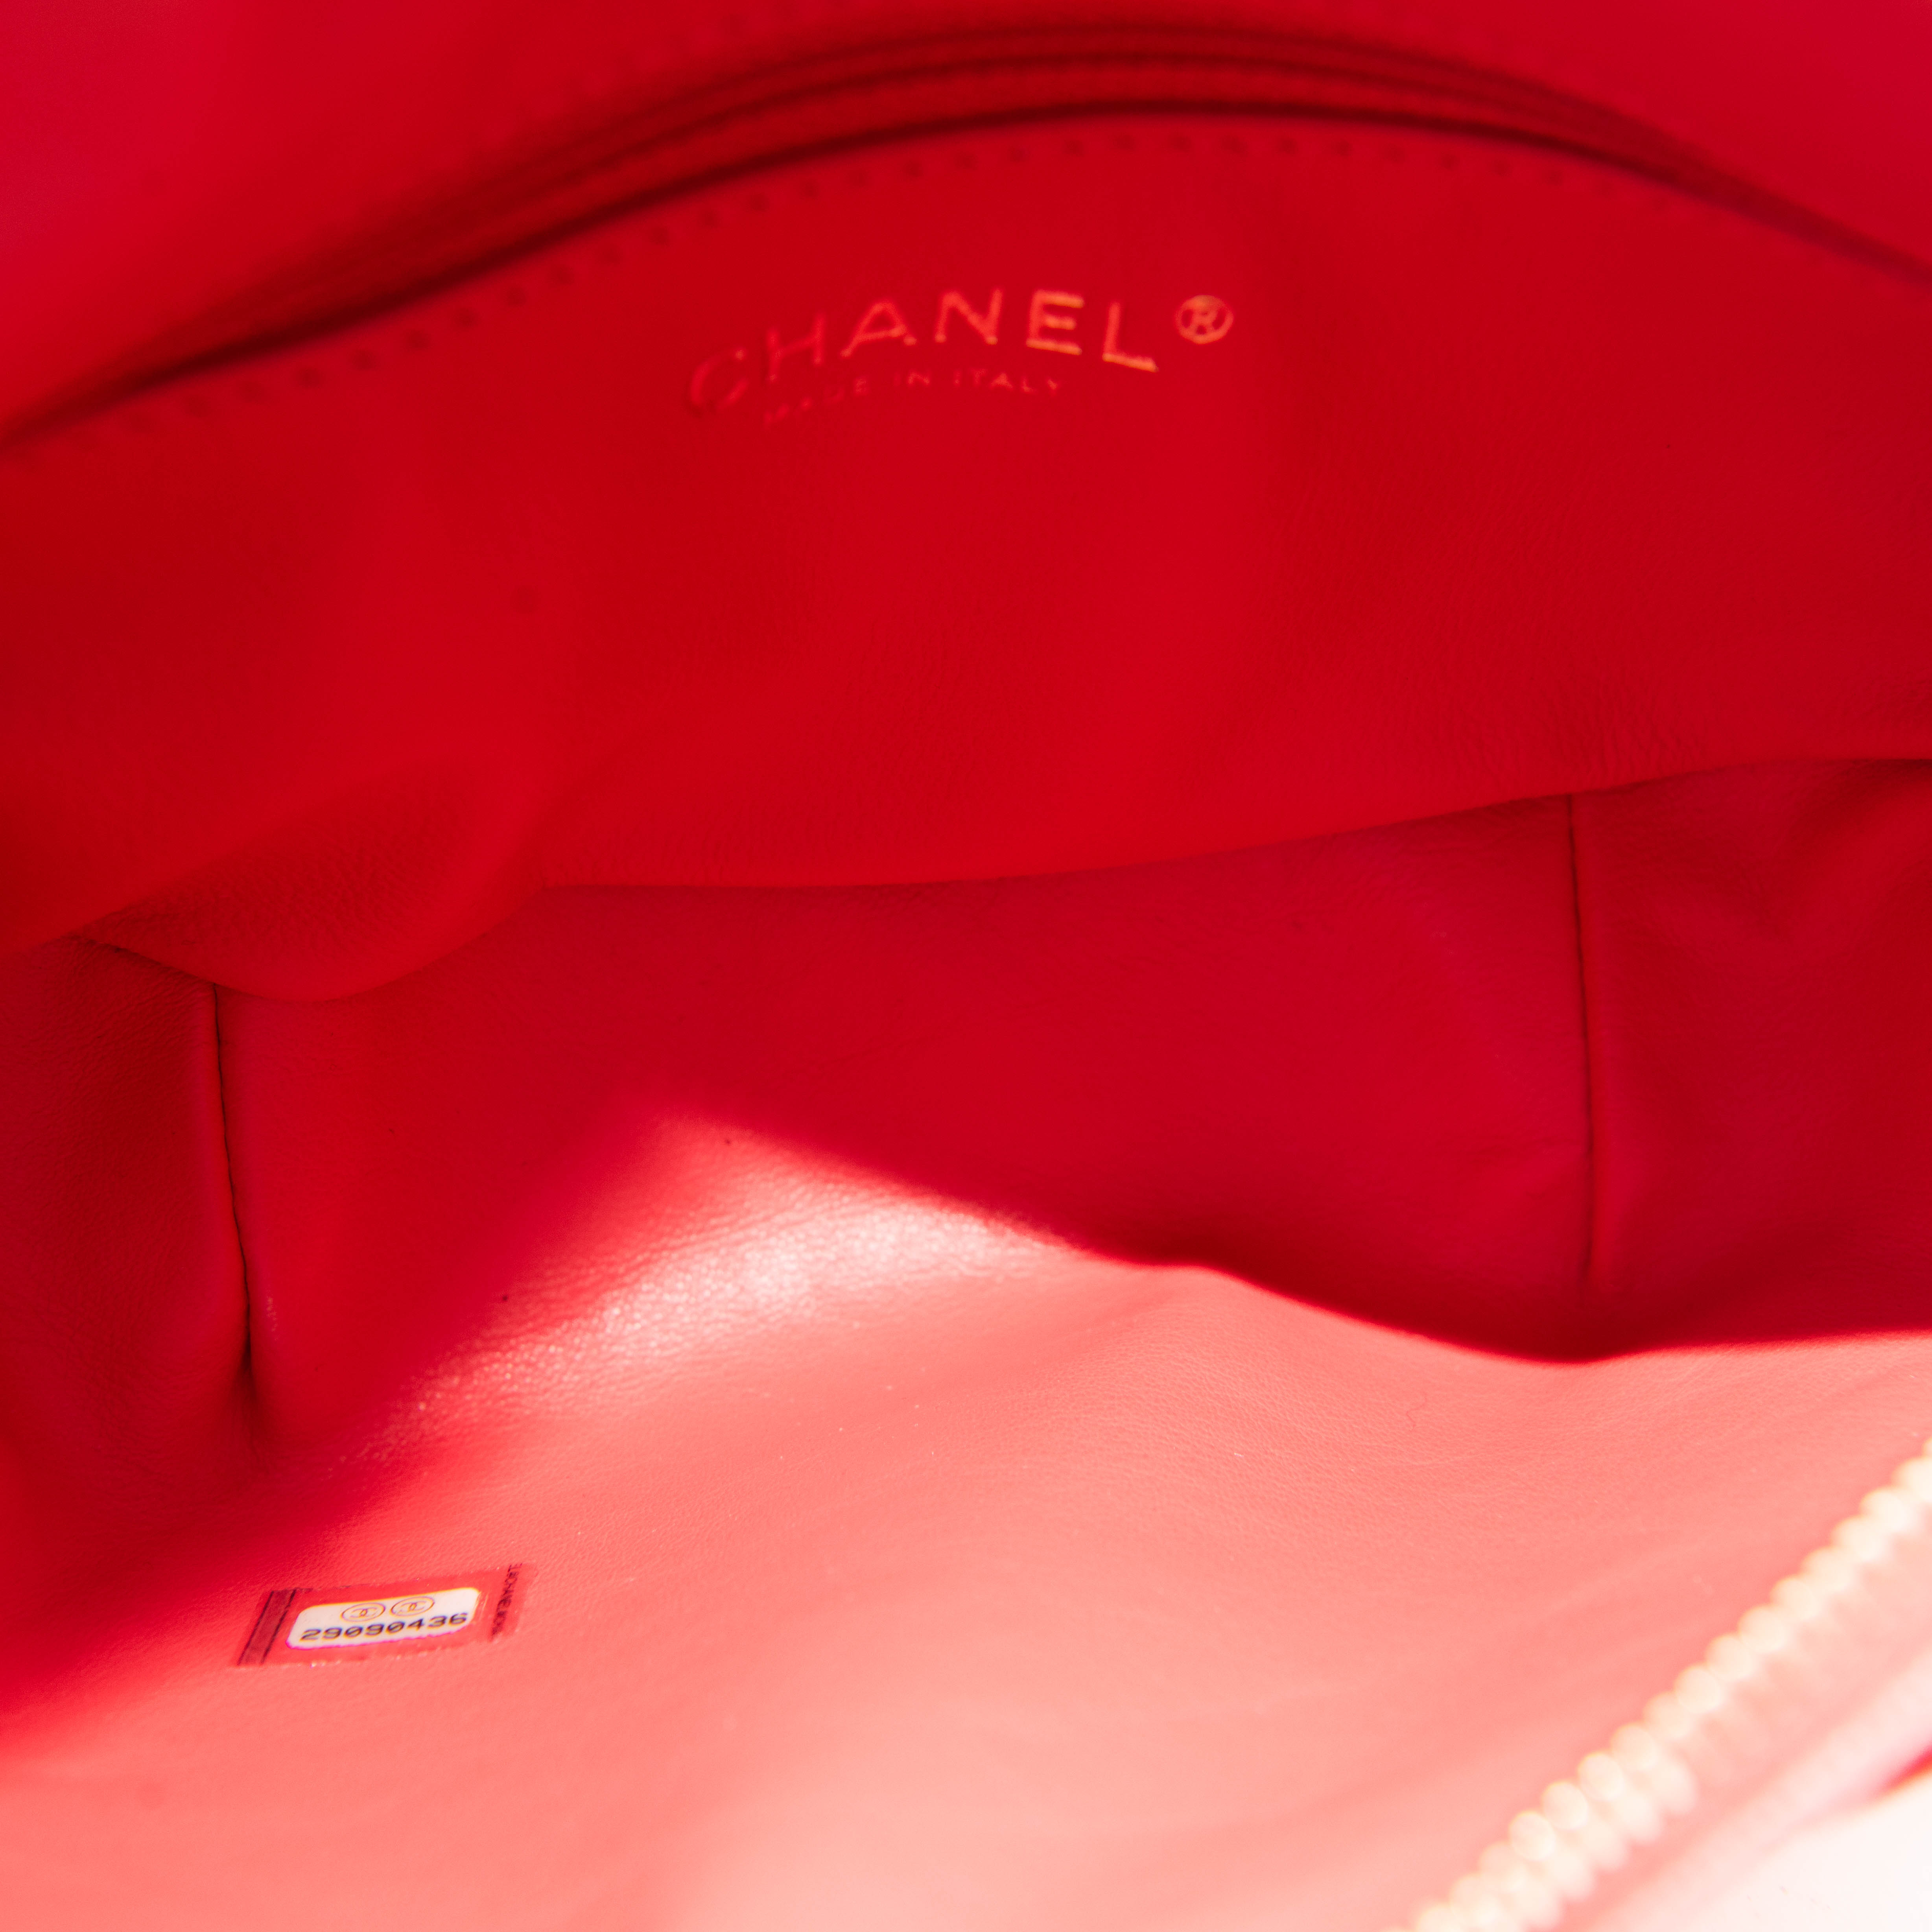 Chanel Red Quilted Caviar Leather Logo Waist Bag